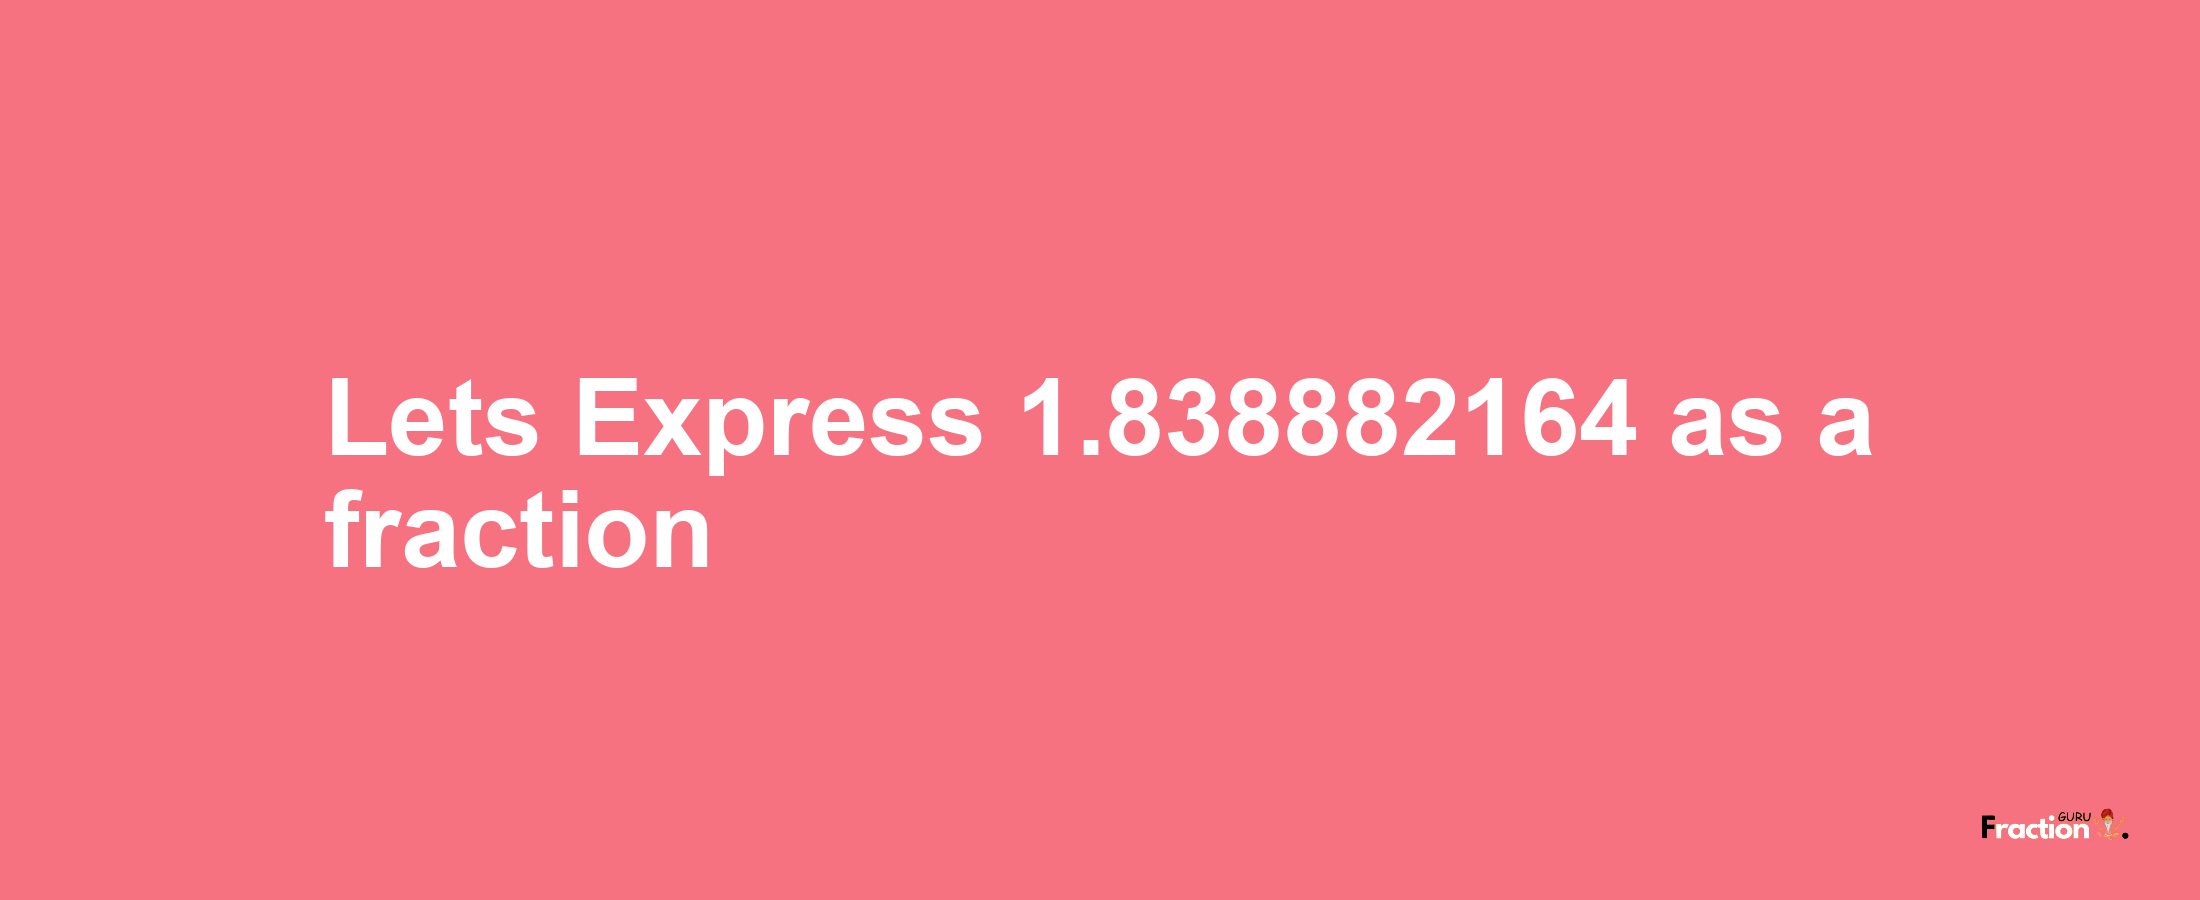 Lets Express 1.838882164 as afraction